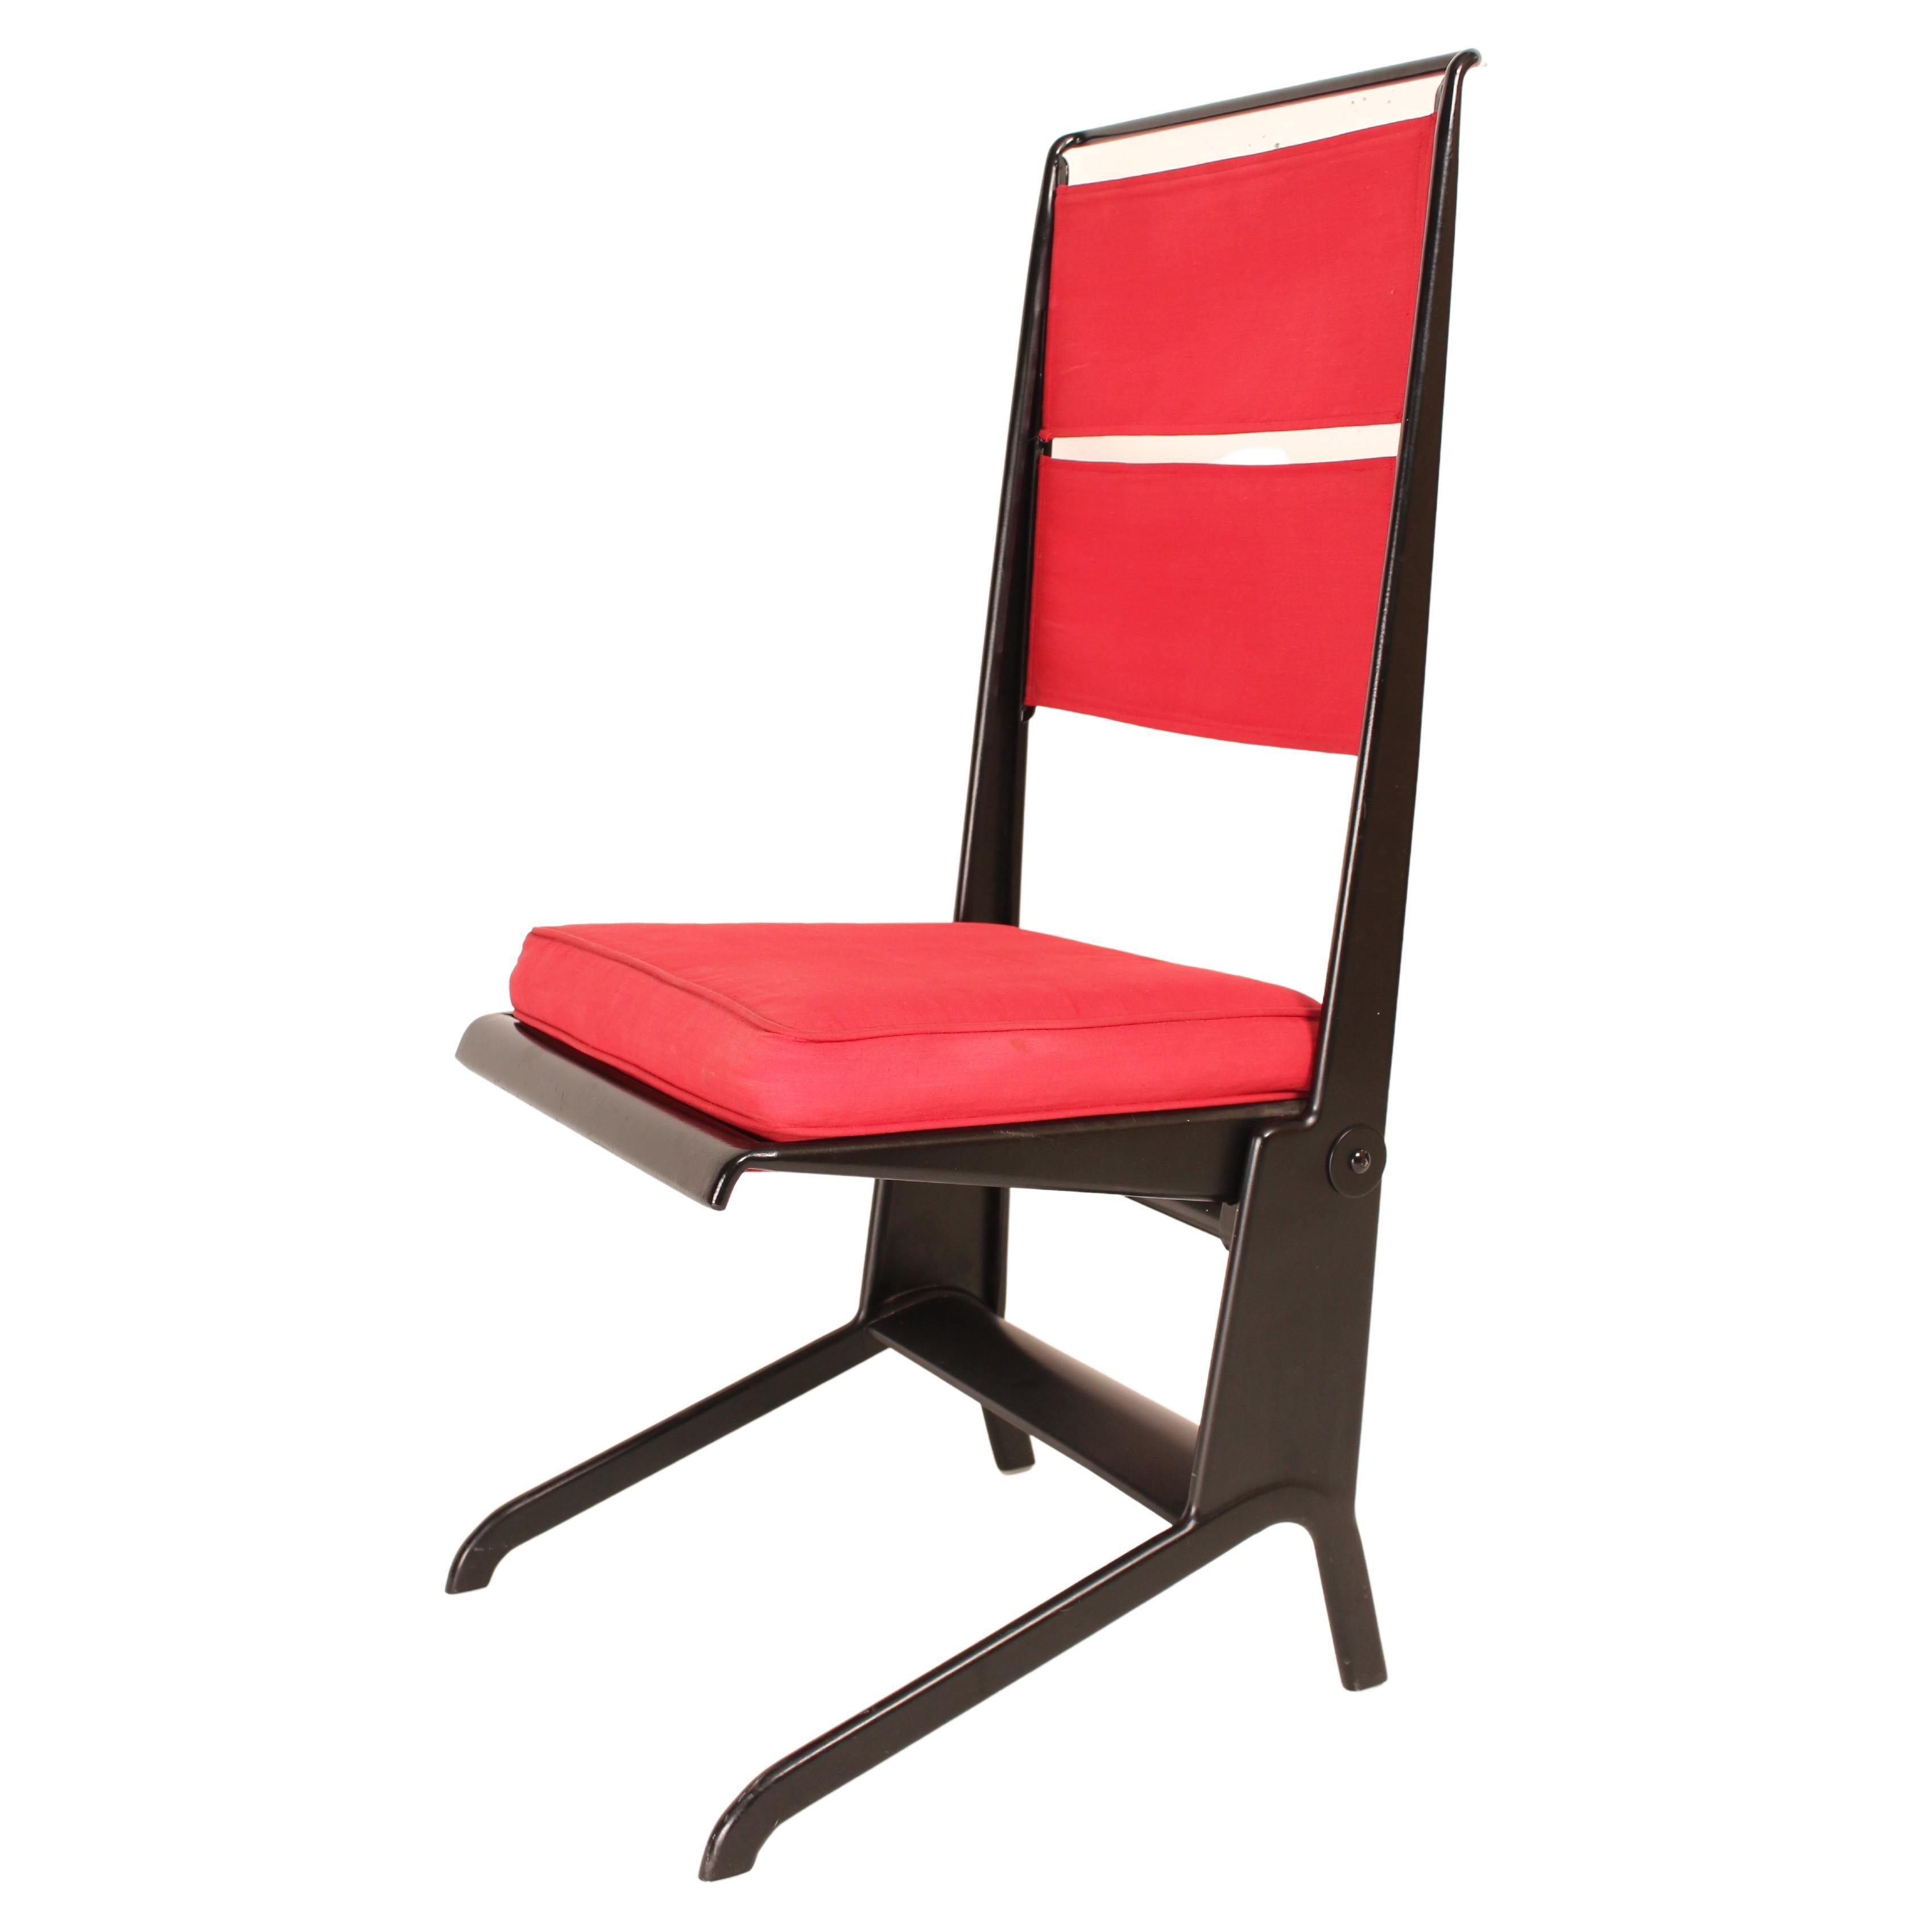 Jean Prouvé Folding Chair Designed 1930, Manufactured by Tecta, 1983 For Sale